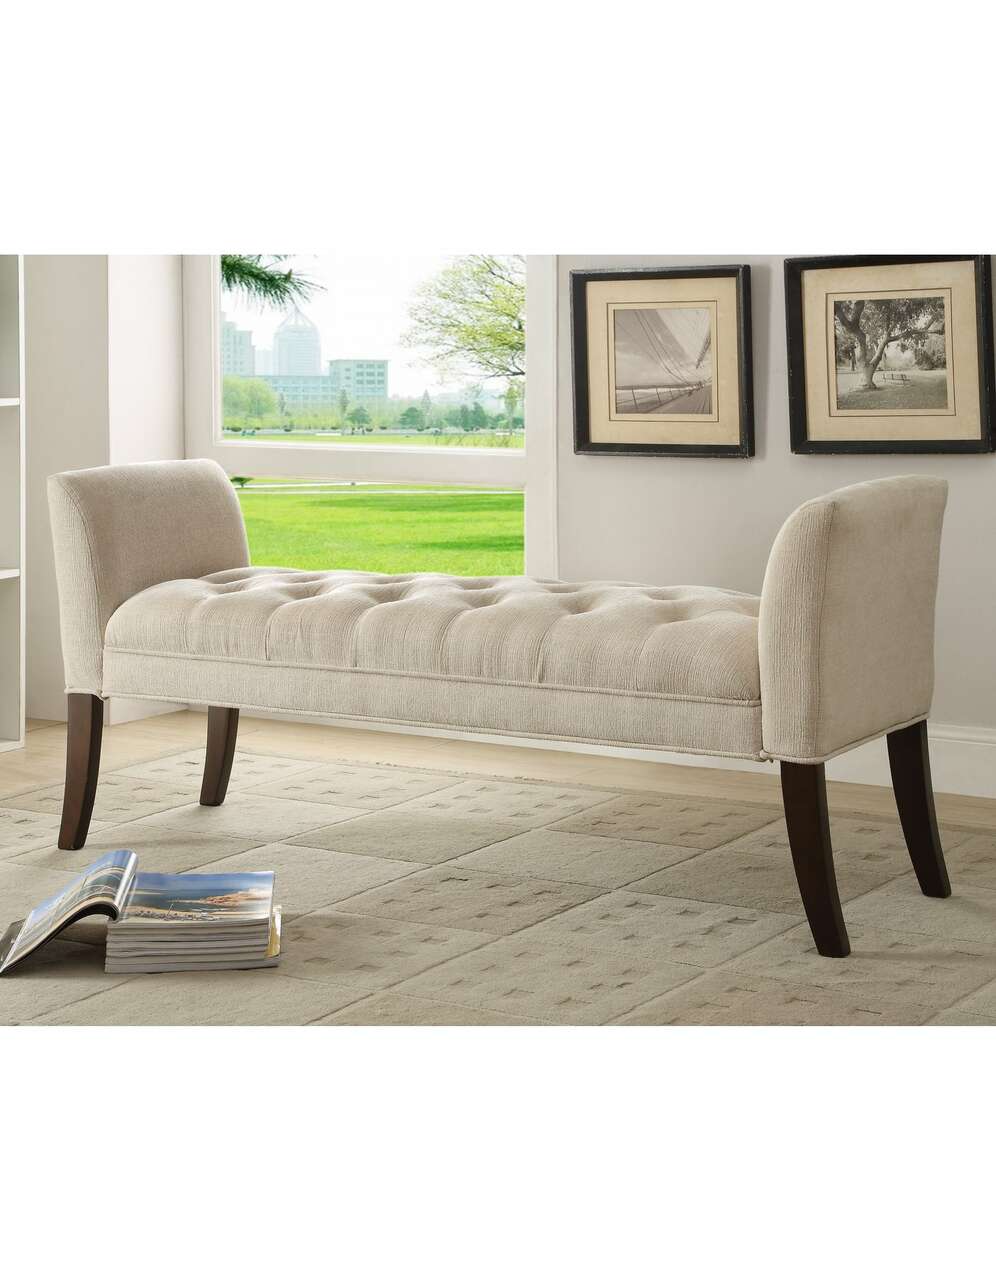 23081 Accent Bench $284.99